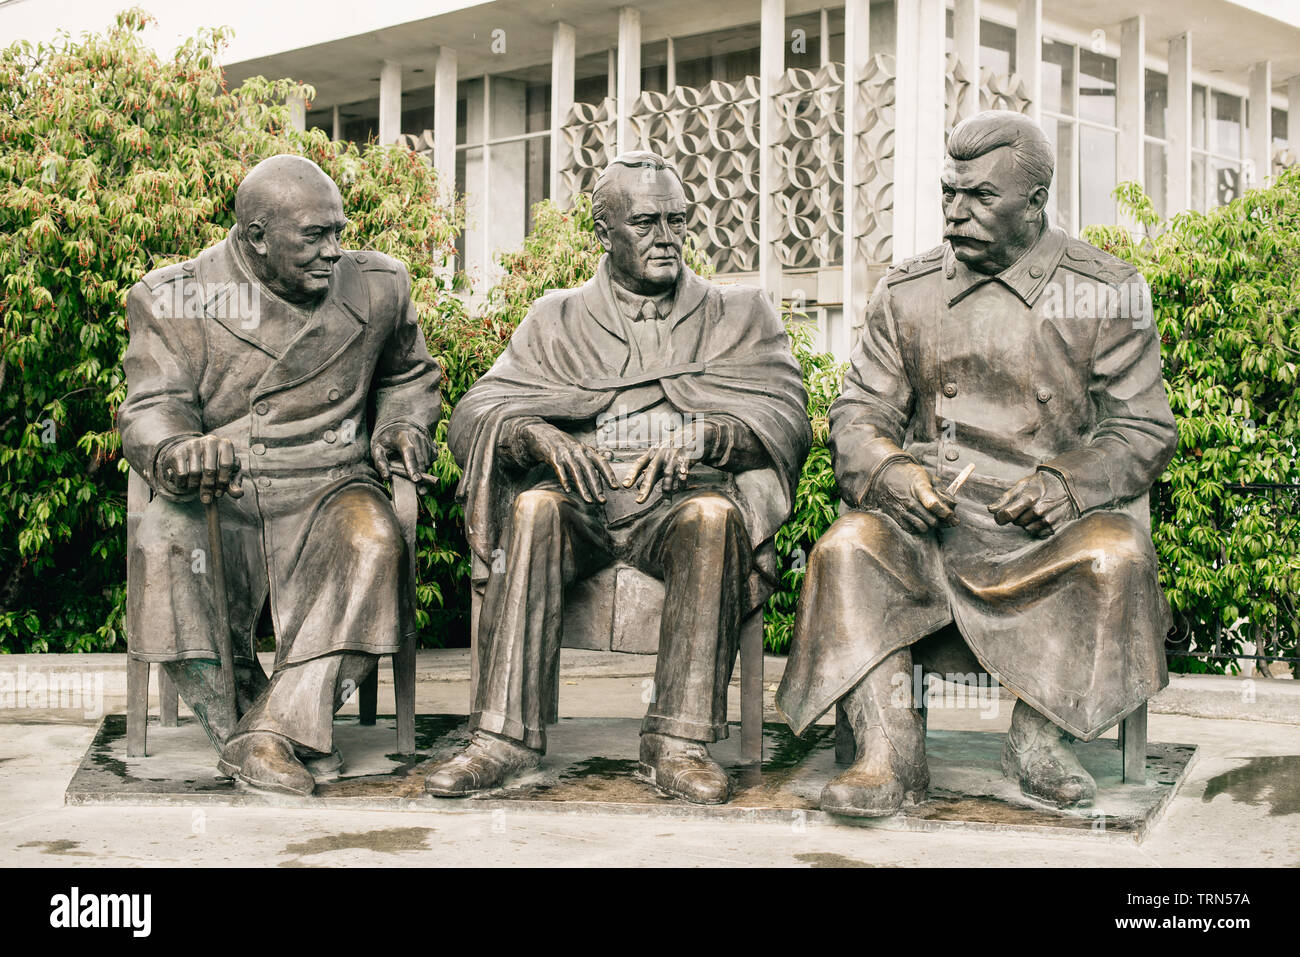 Yalta. Crimea. Russia - August 31, 2017: Monument to the Leaders of the 'Big Three' - Joseph Stalin, Franklin Roosevelt and Winston Churchill. Stock Photo